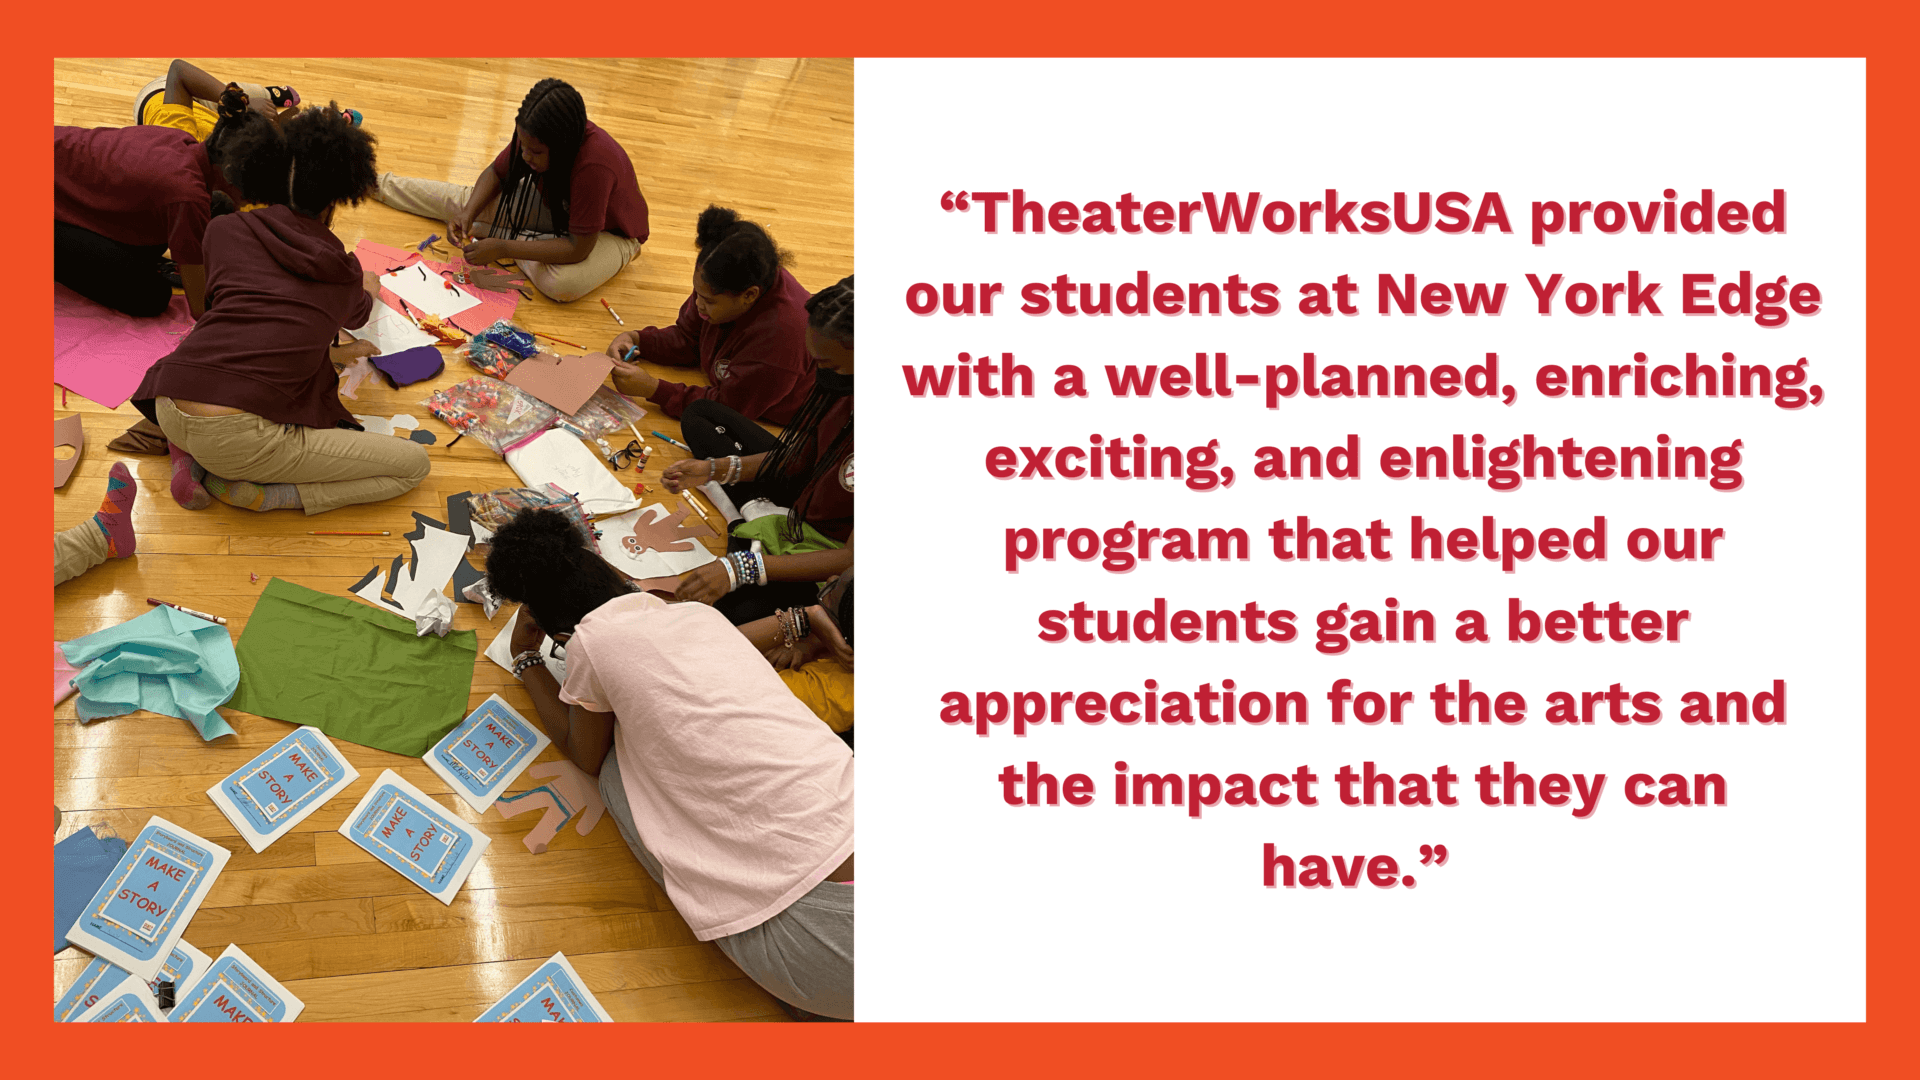 "TheaterWorksUSA provided our students at New York Edge with a well-planned, enriching, exciting, and enlightening program that helped our students gain a better appreaciation for the arts and the impact they can have."